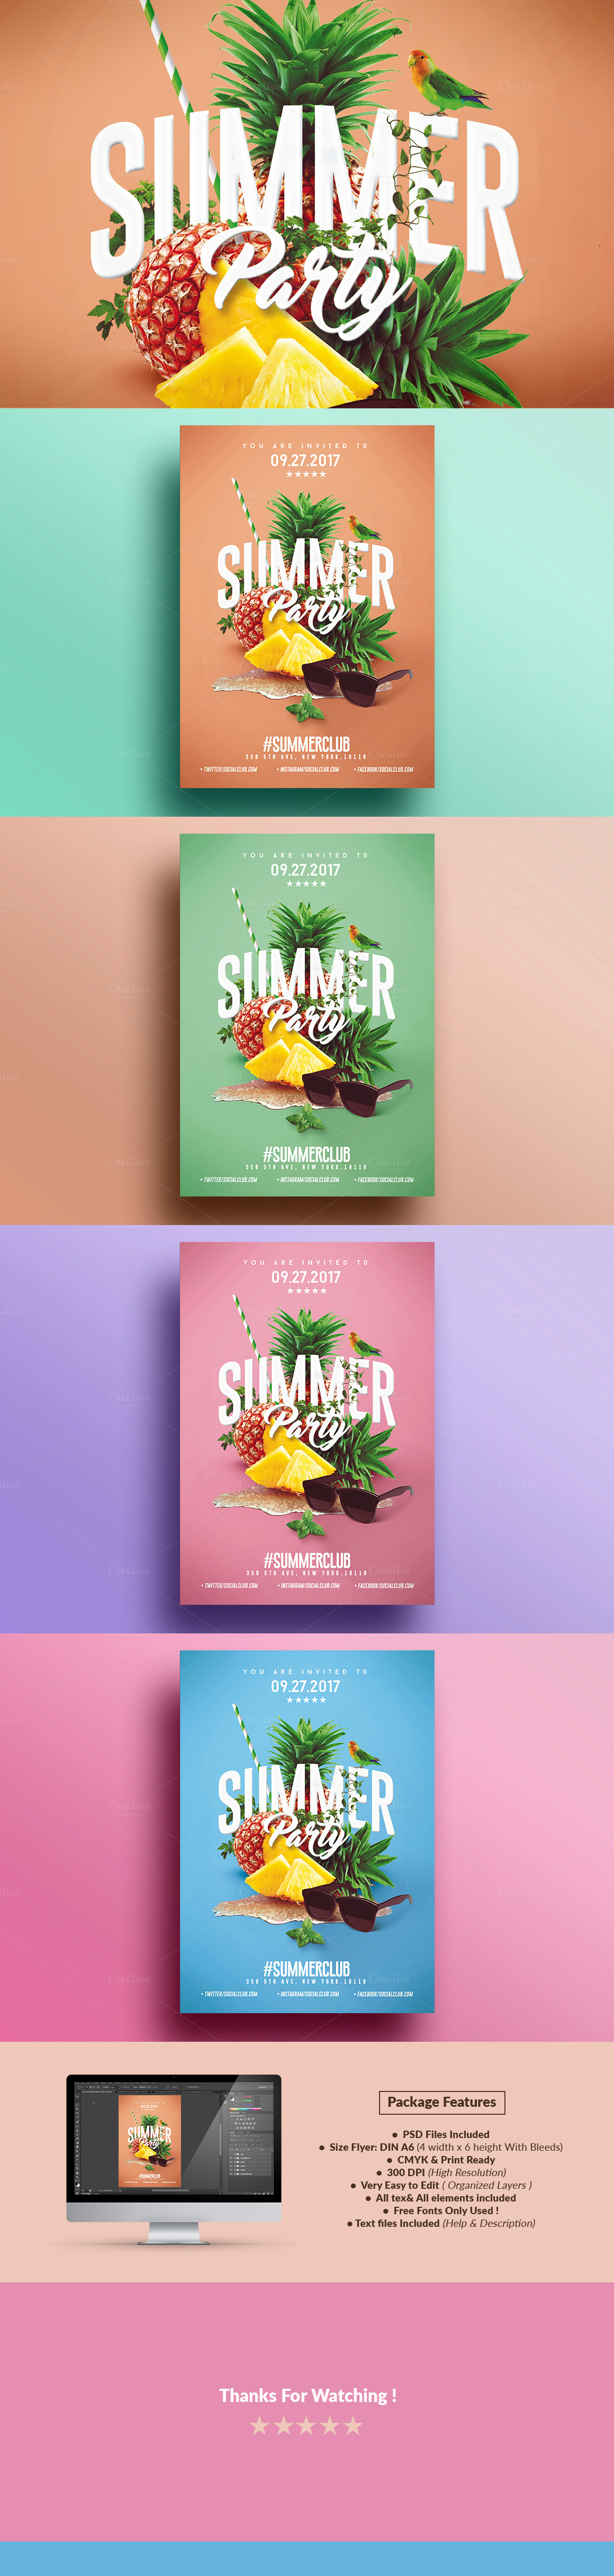 photoshop graphics flyers posters summer Invitation spring party beach PSD Templates